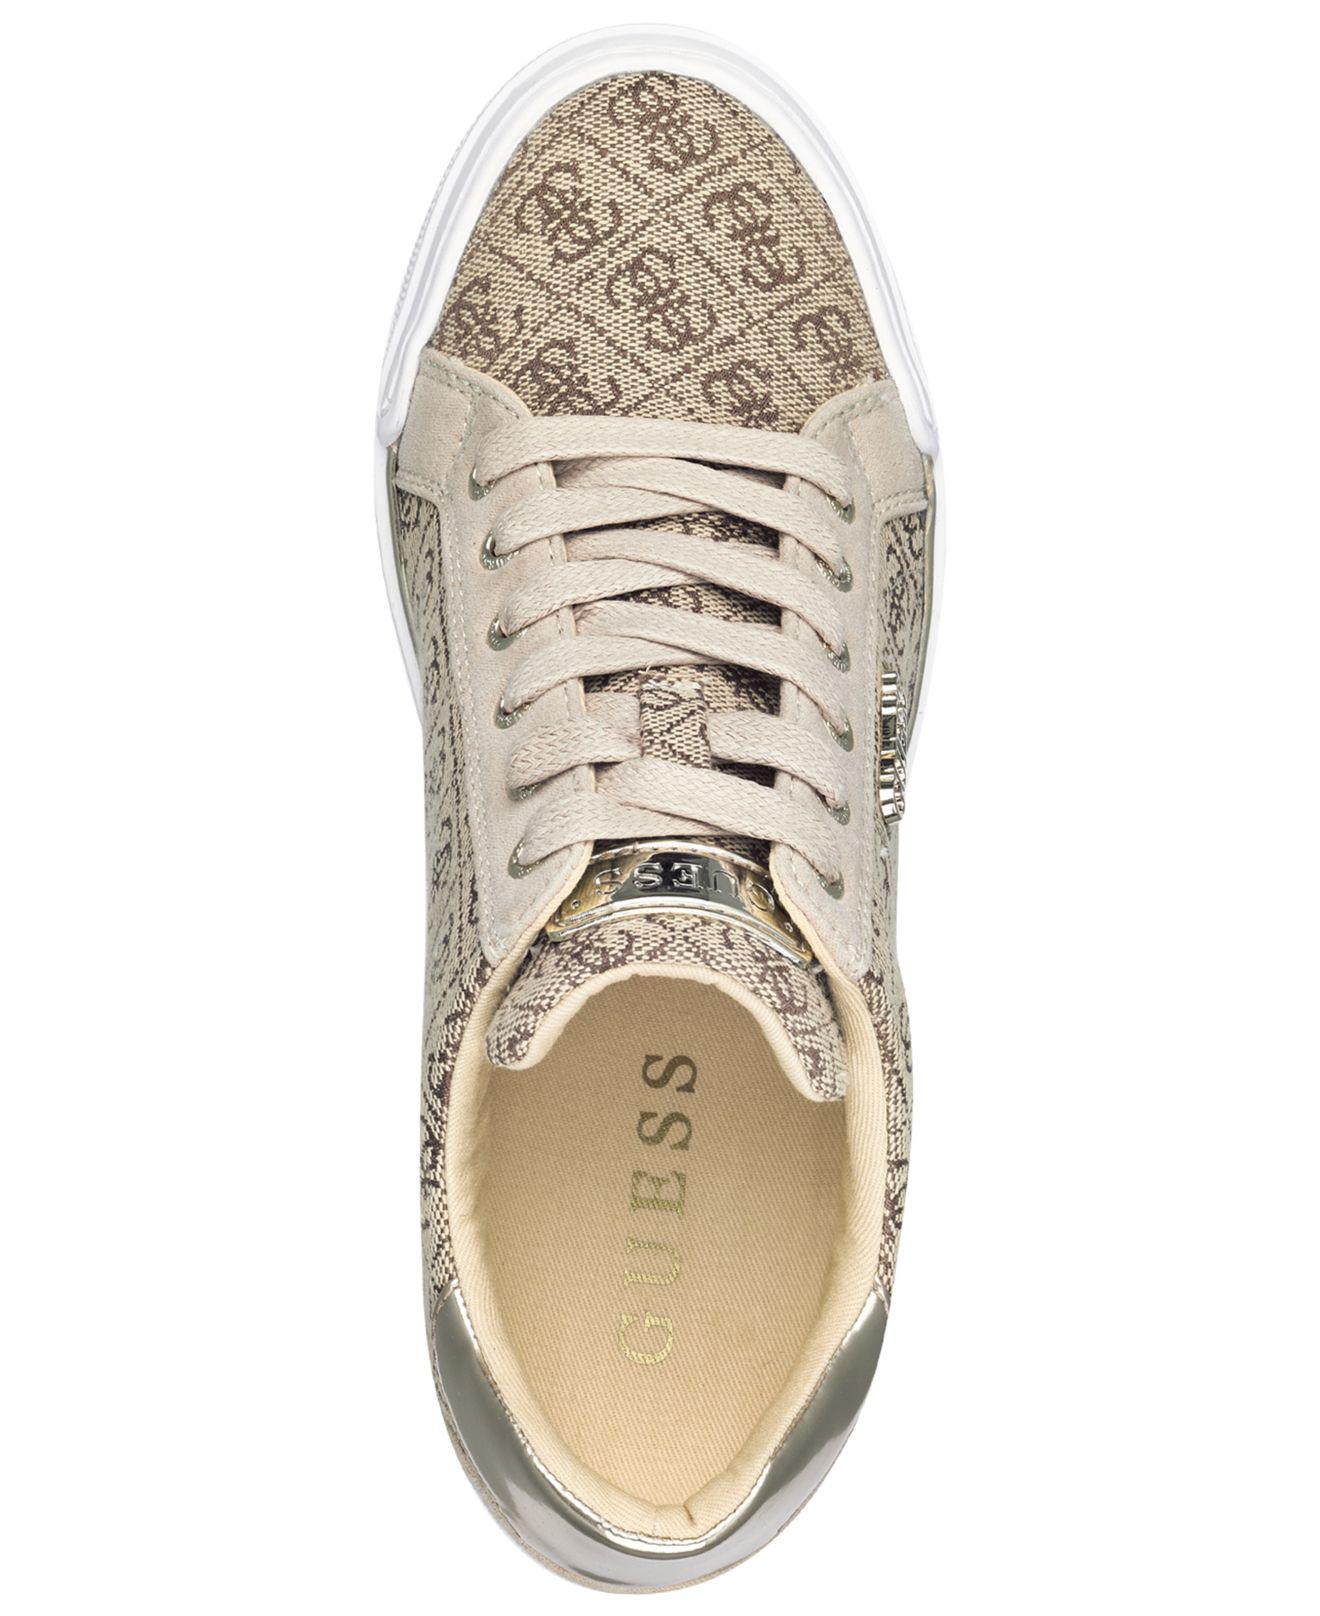 guess flowers sneakers